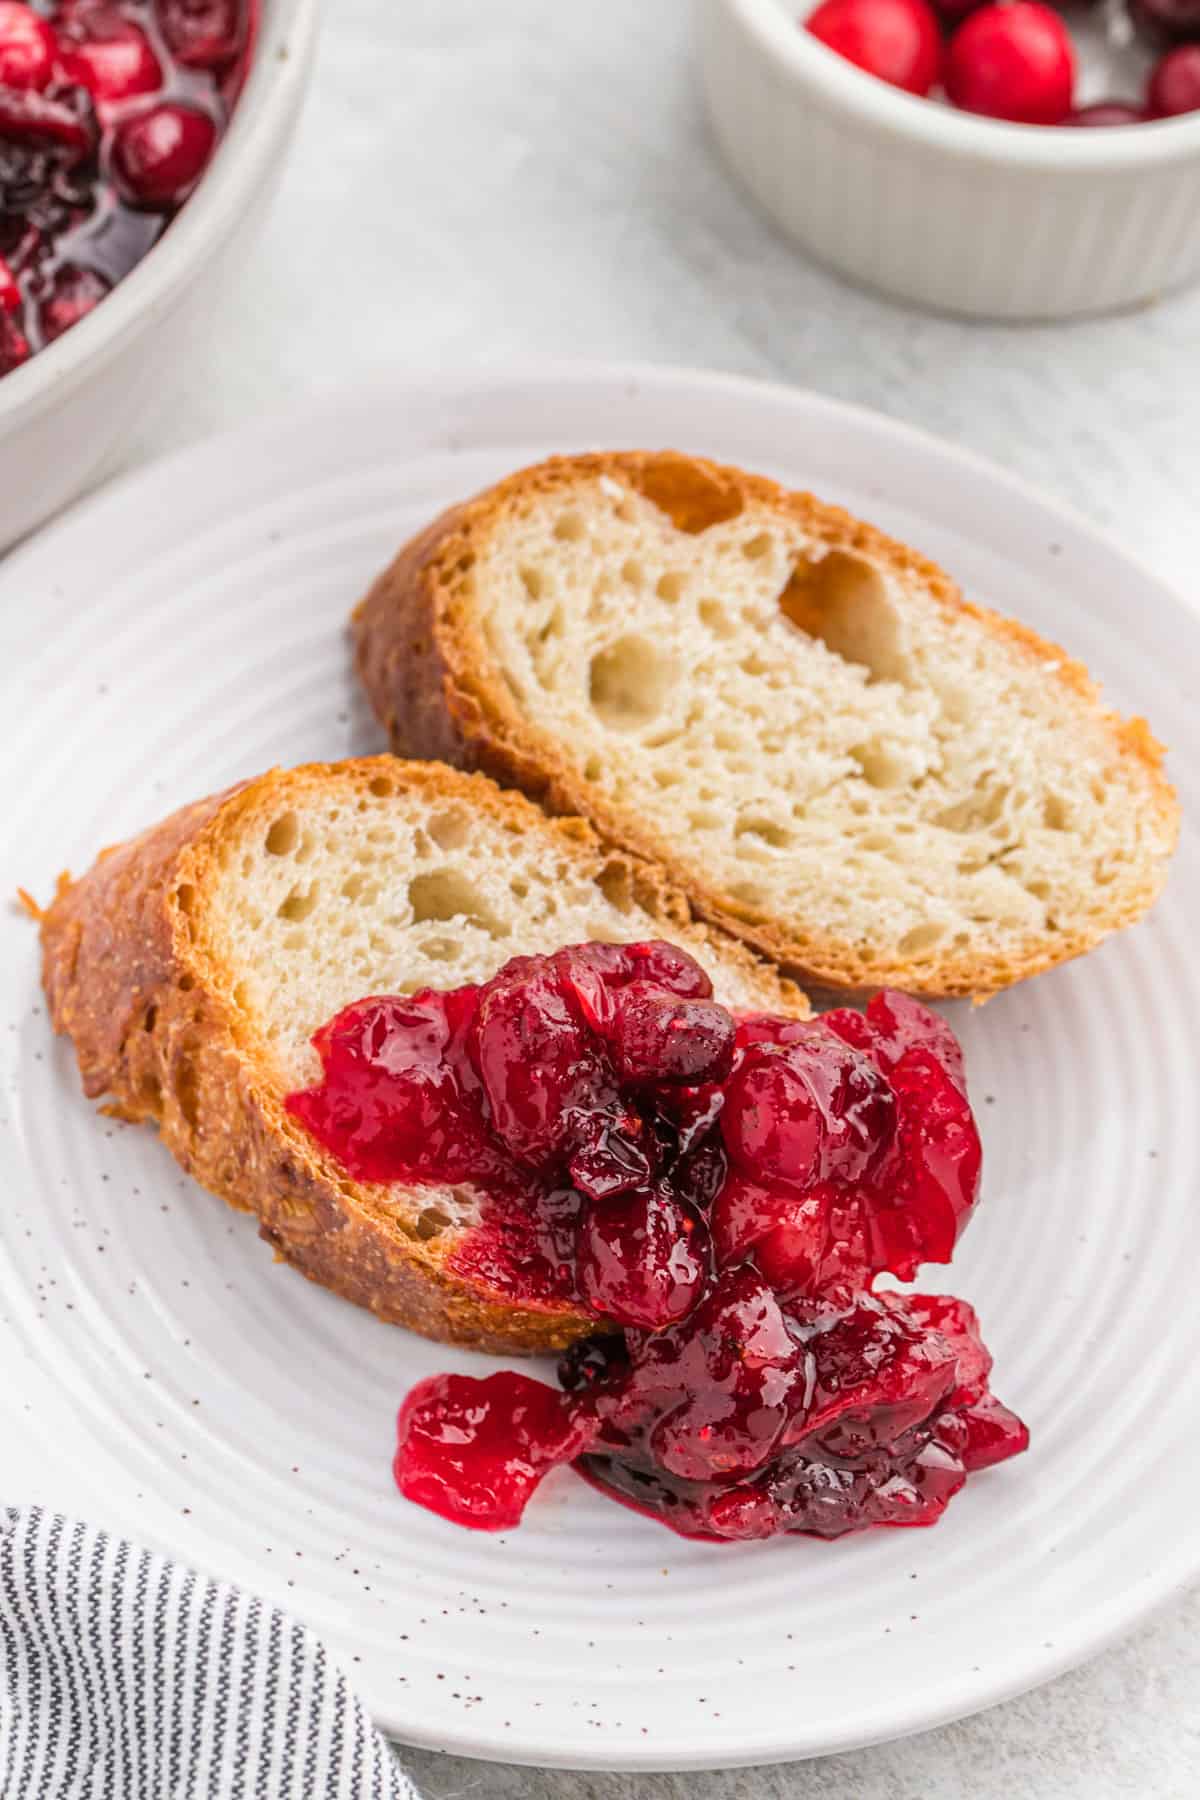 Whole berry cranberry sauce on baguette slices.